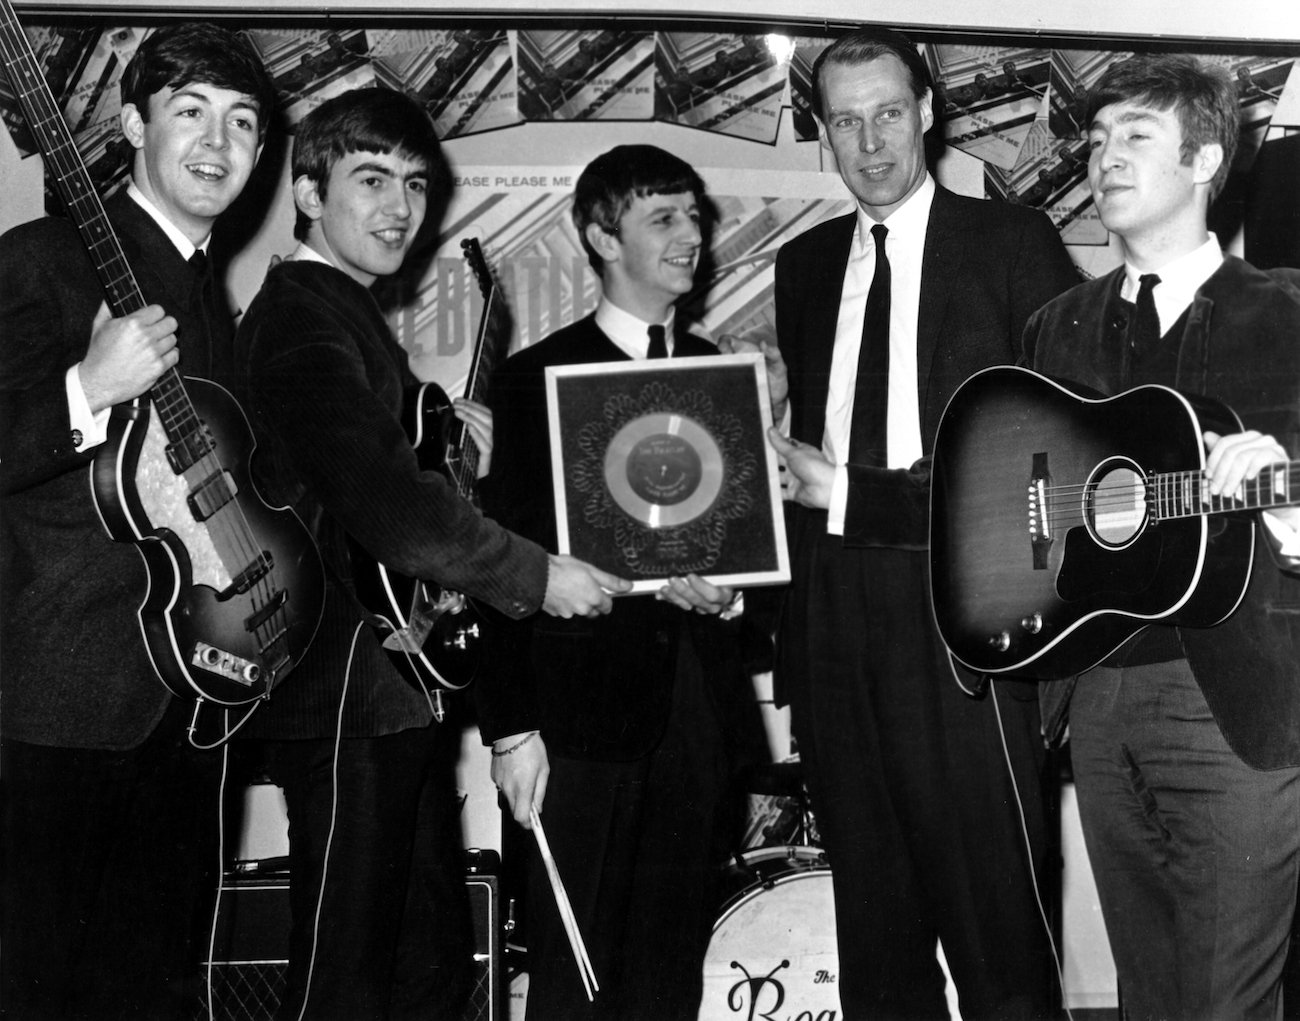 The Beatles posing with their producer, George Martin, in the early 1960s.